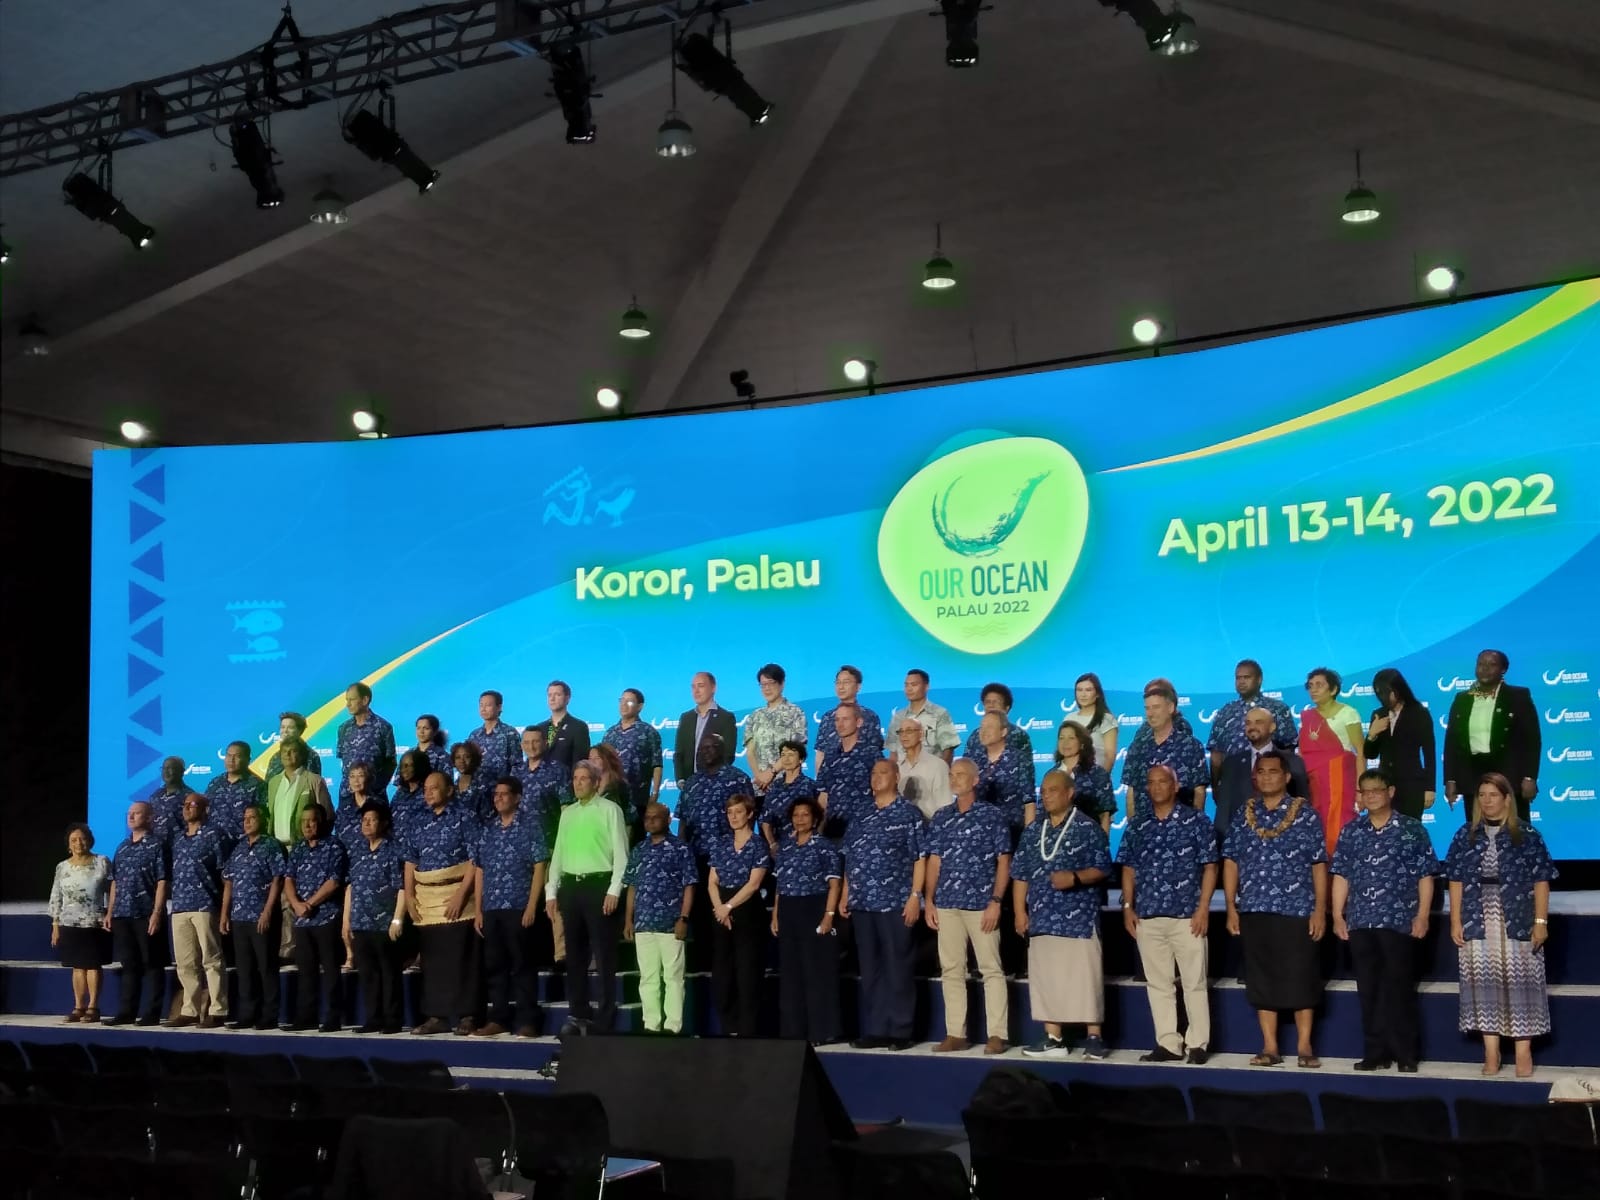 Our Ocean announces Our Ocean 2023 hosted in Panama